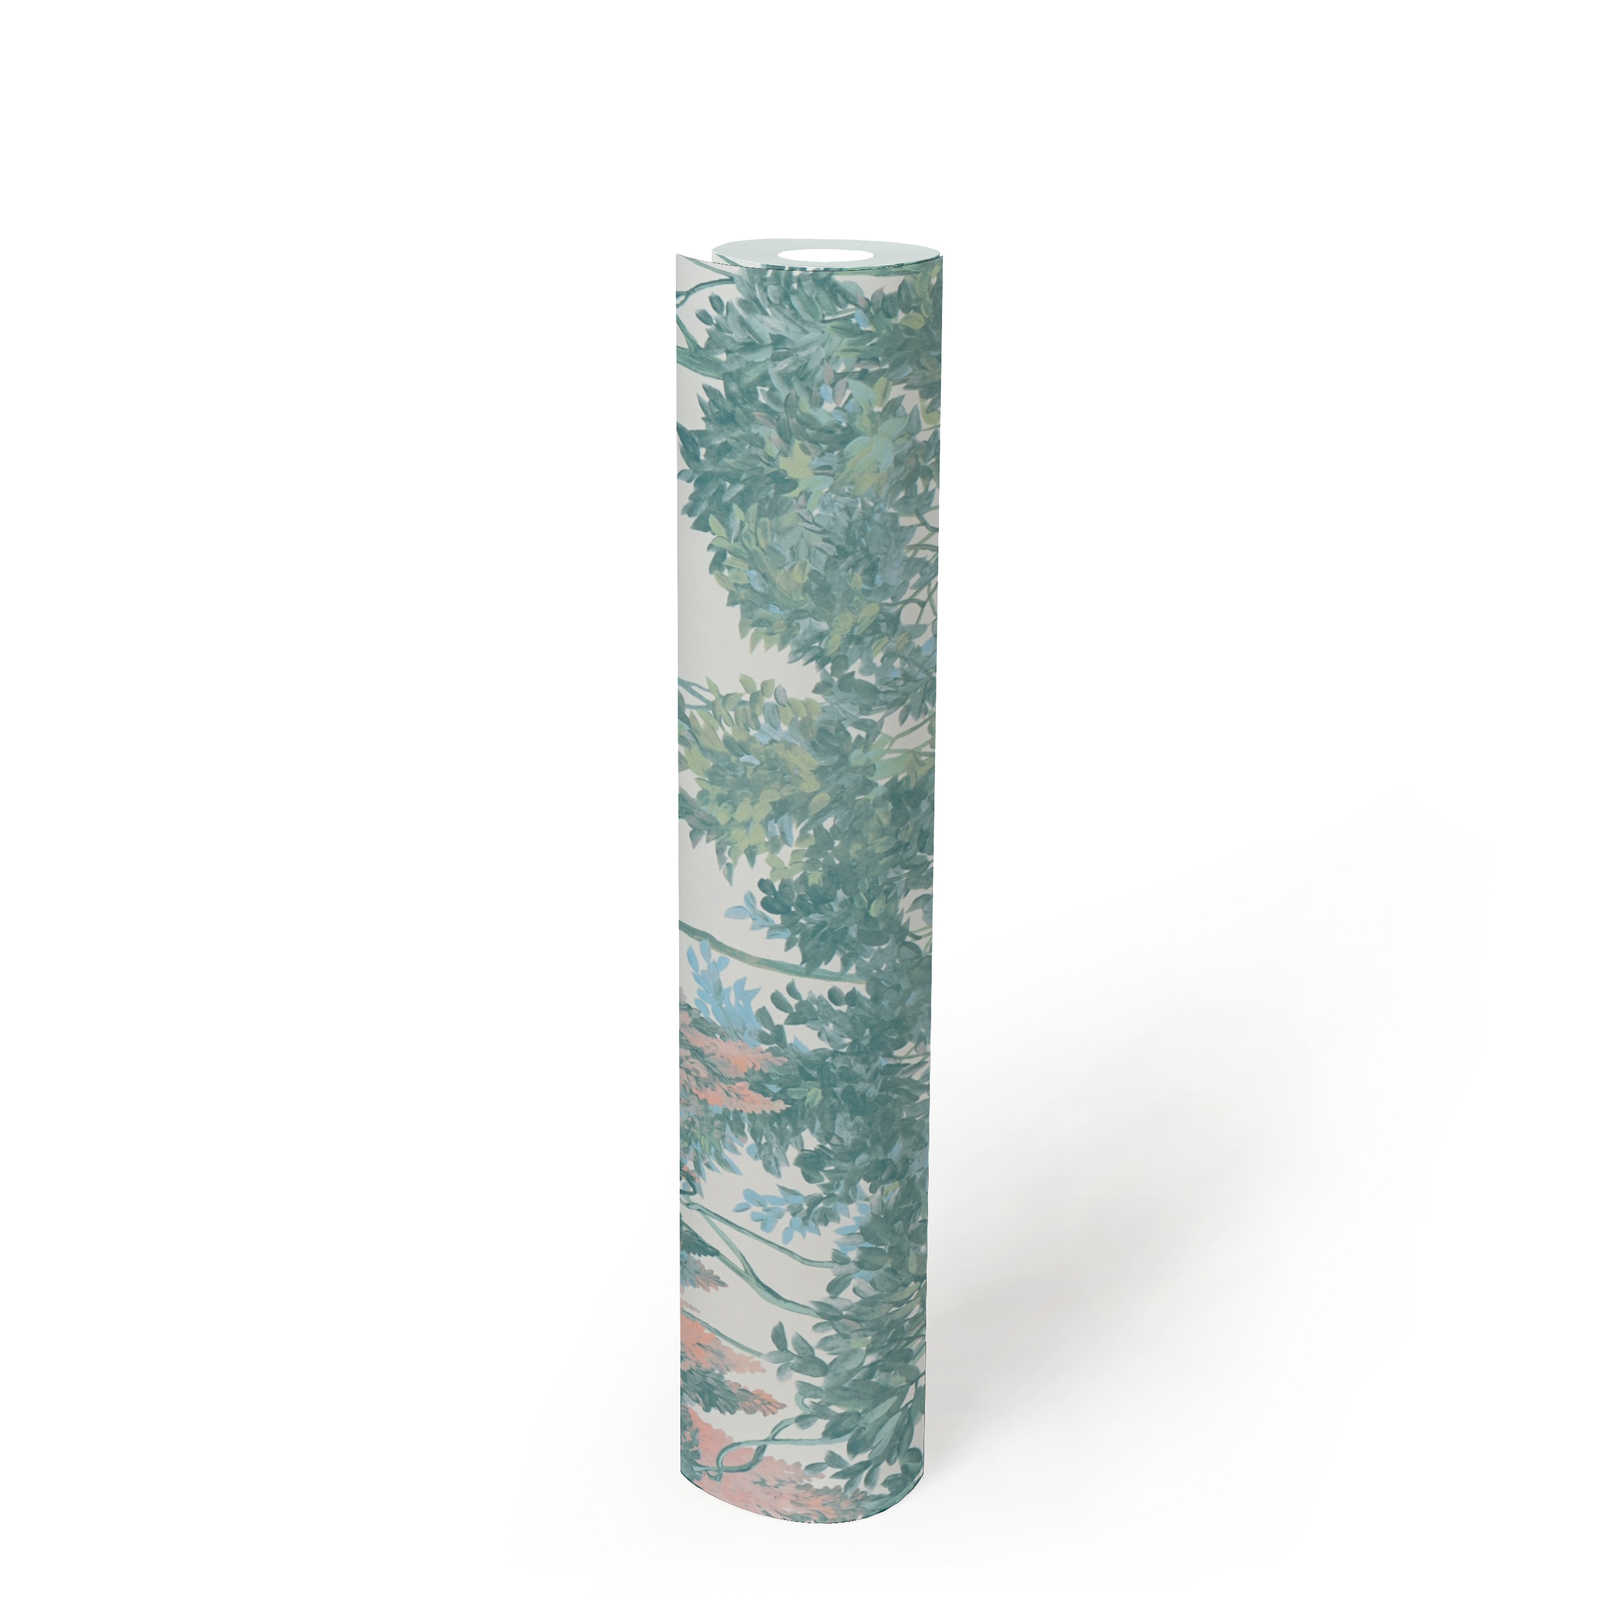             Non-woven wallpaper in jungle style with trees - colourful, green, white
        